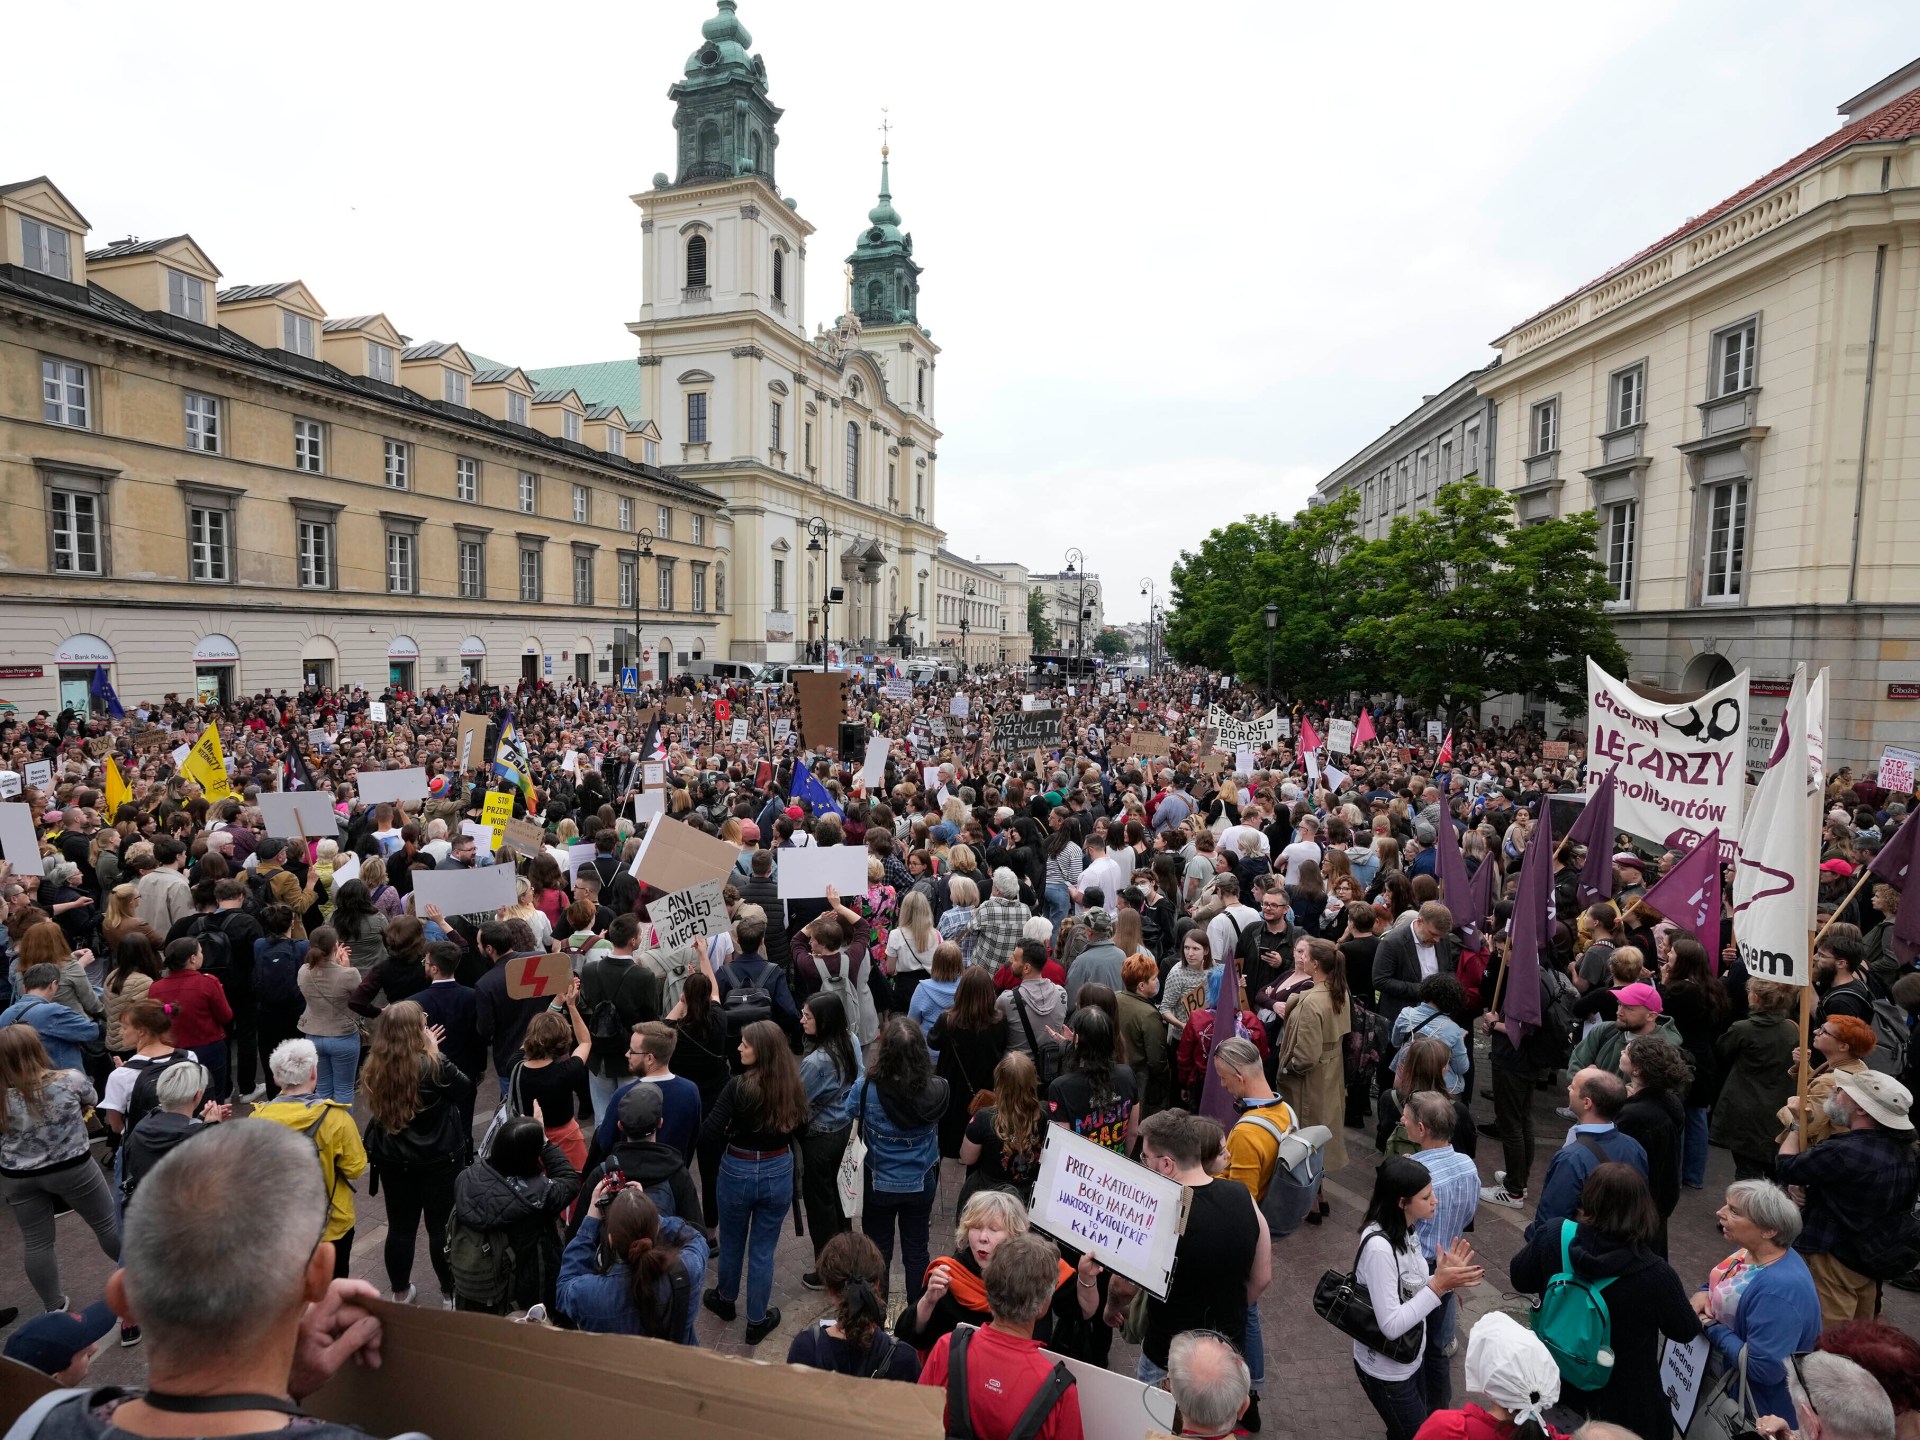 Polish lawmakers debate reforming strict abortion laws | Women’s Rights News